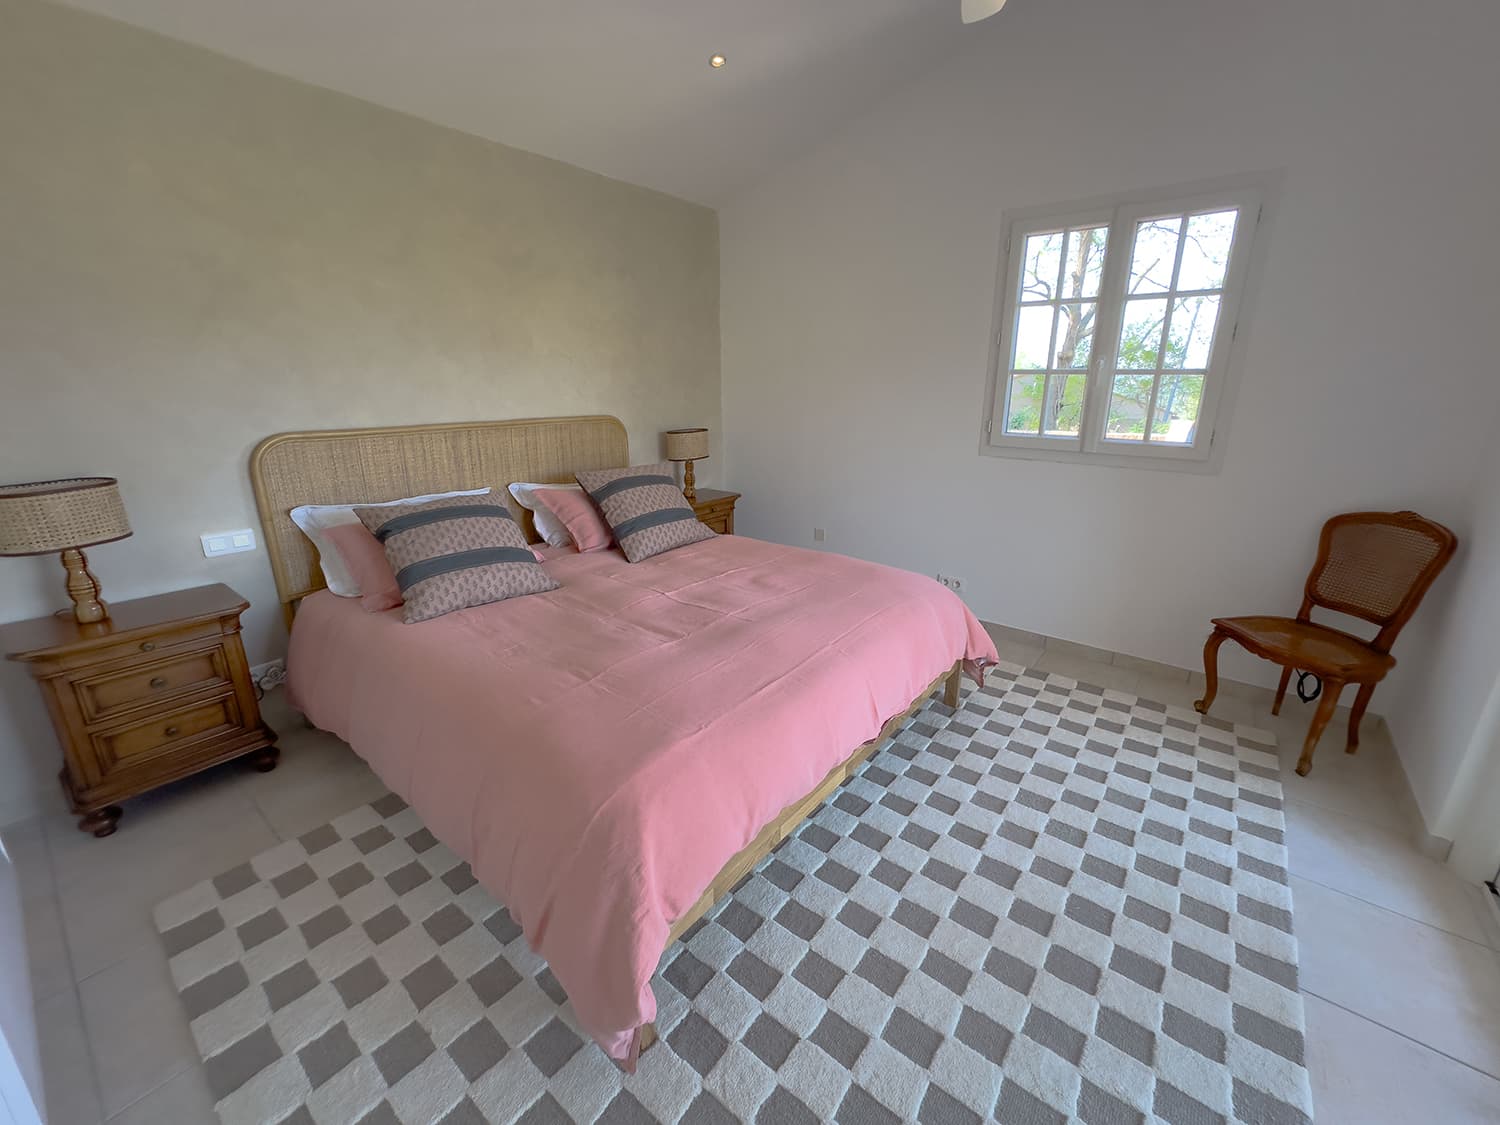 Bedroom | Holiday home in the Var